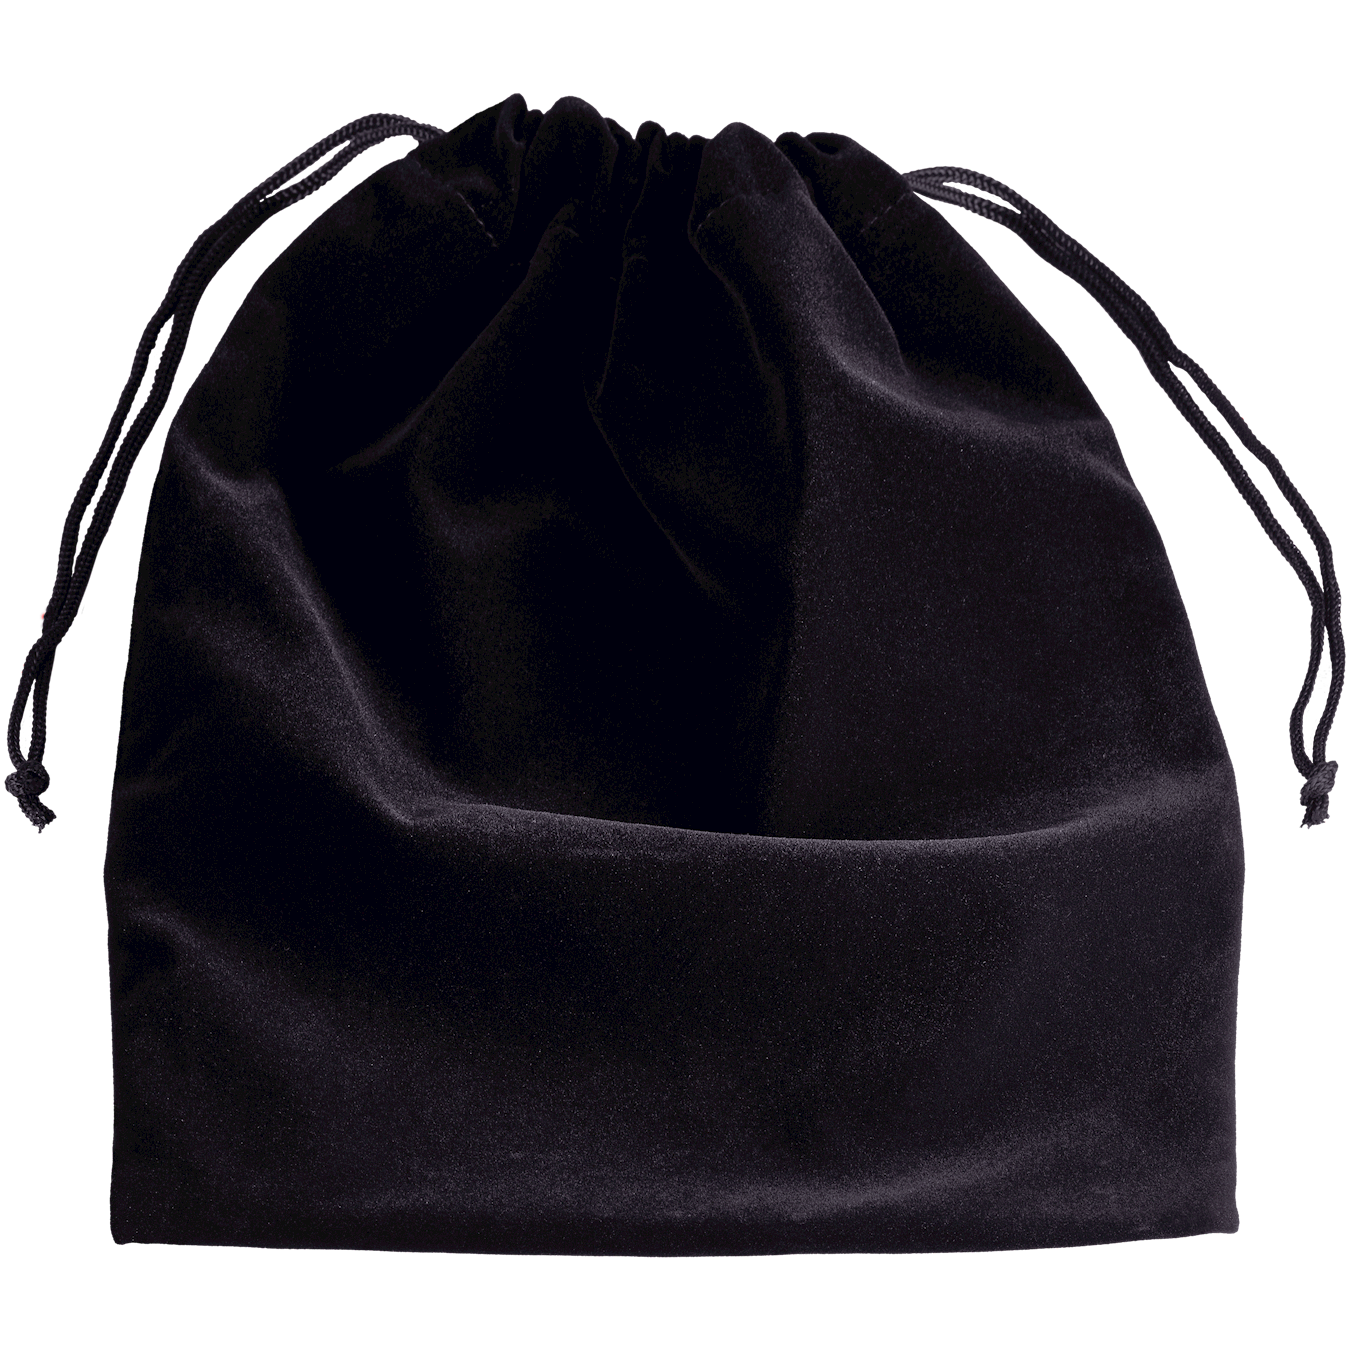 MH752 - included convenient soft carry bag helps protect and organize your headset and other related accessories with ease